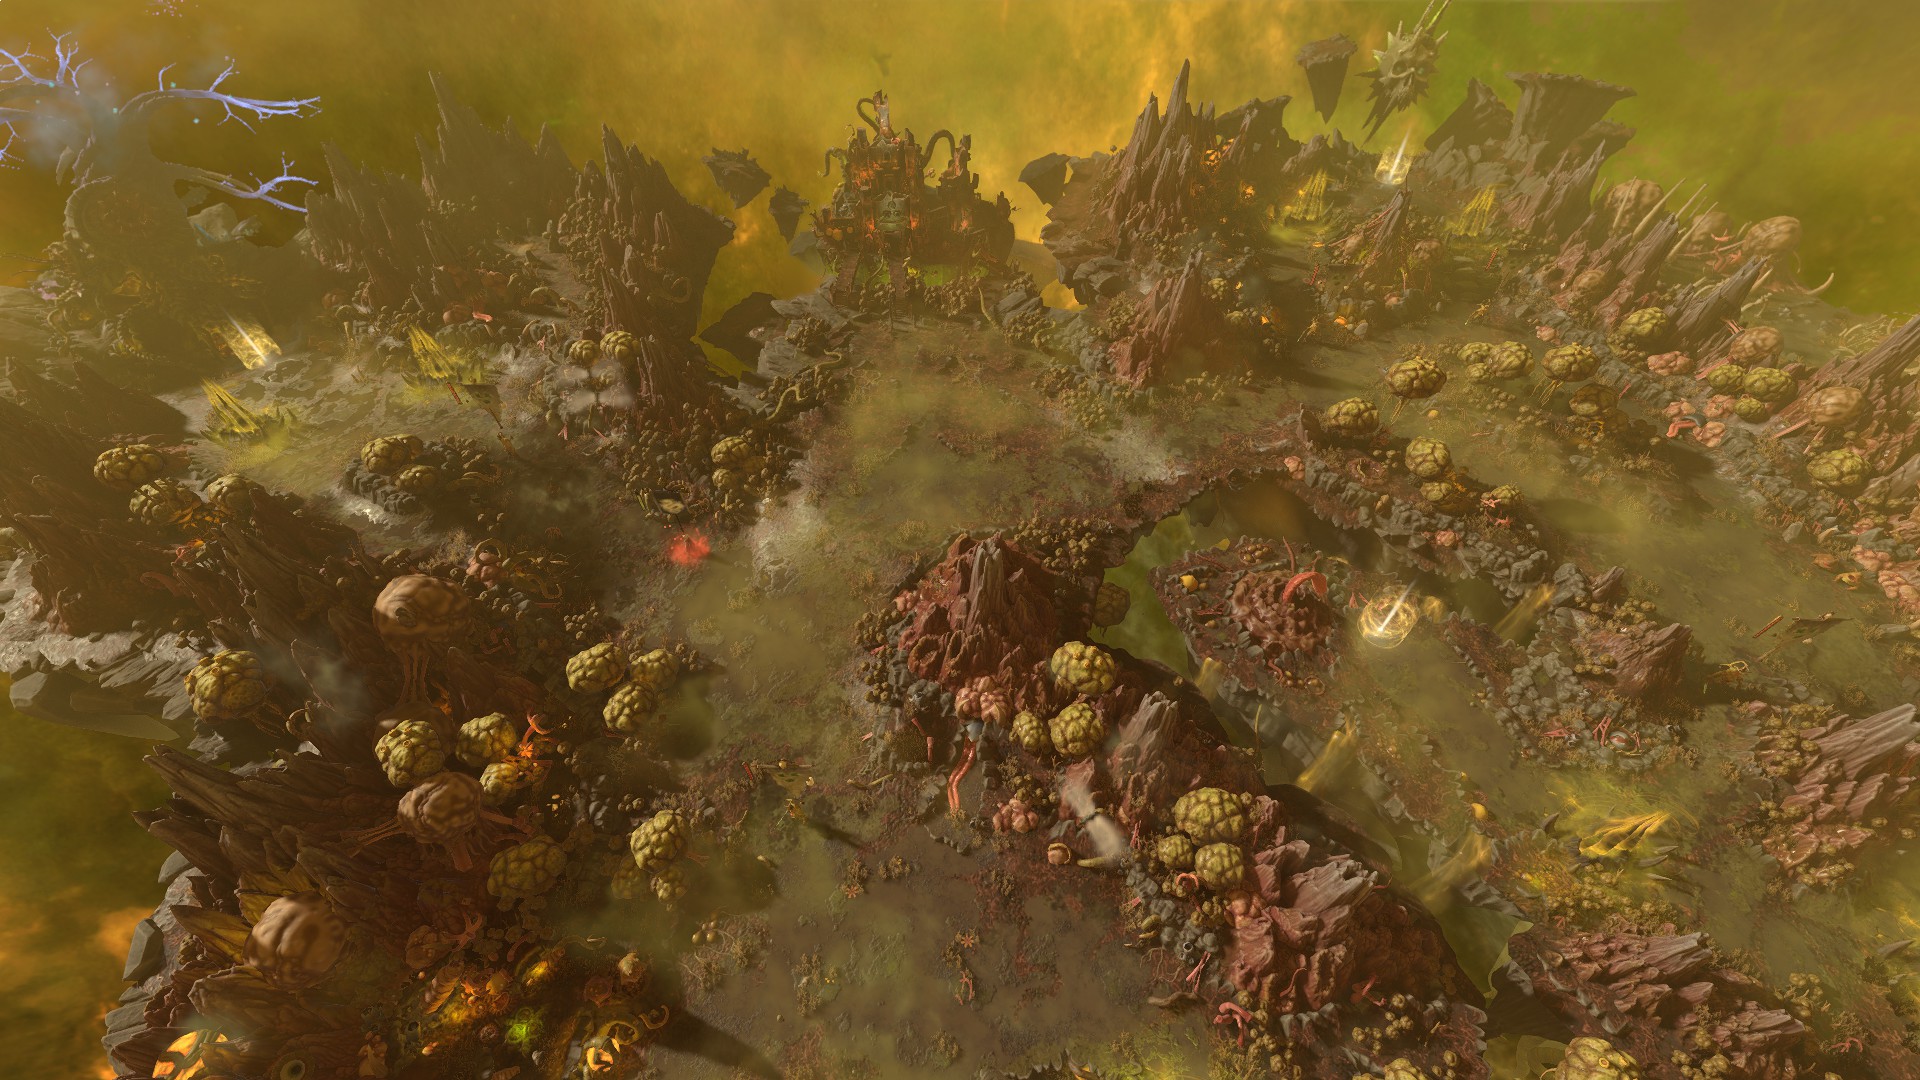 Nurgle's chaos realm in Total War: Warhammer 3